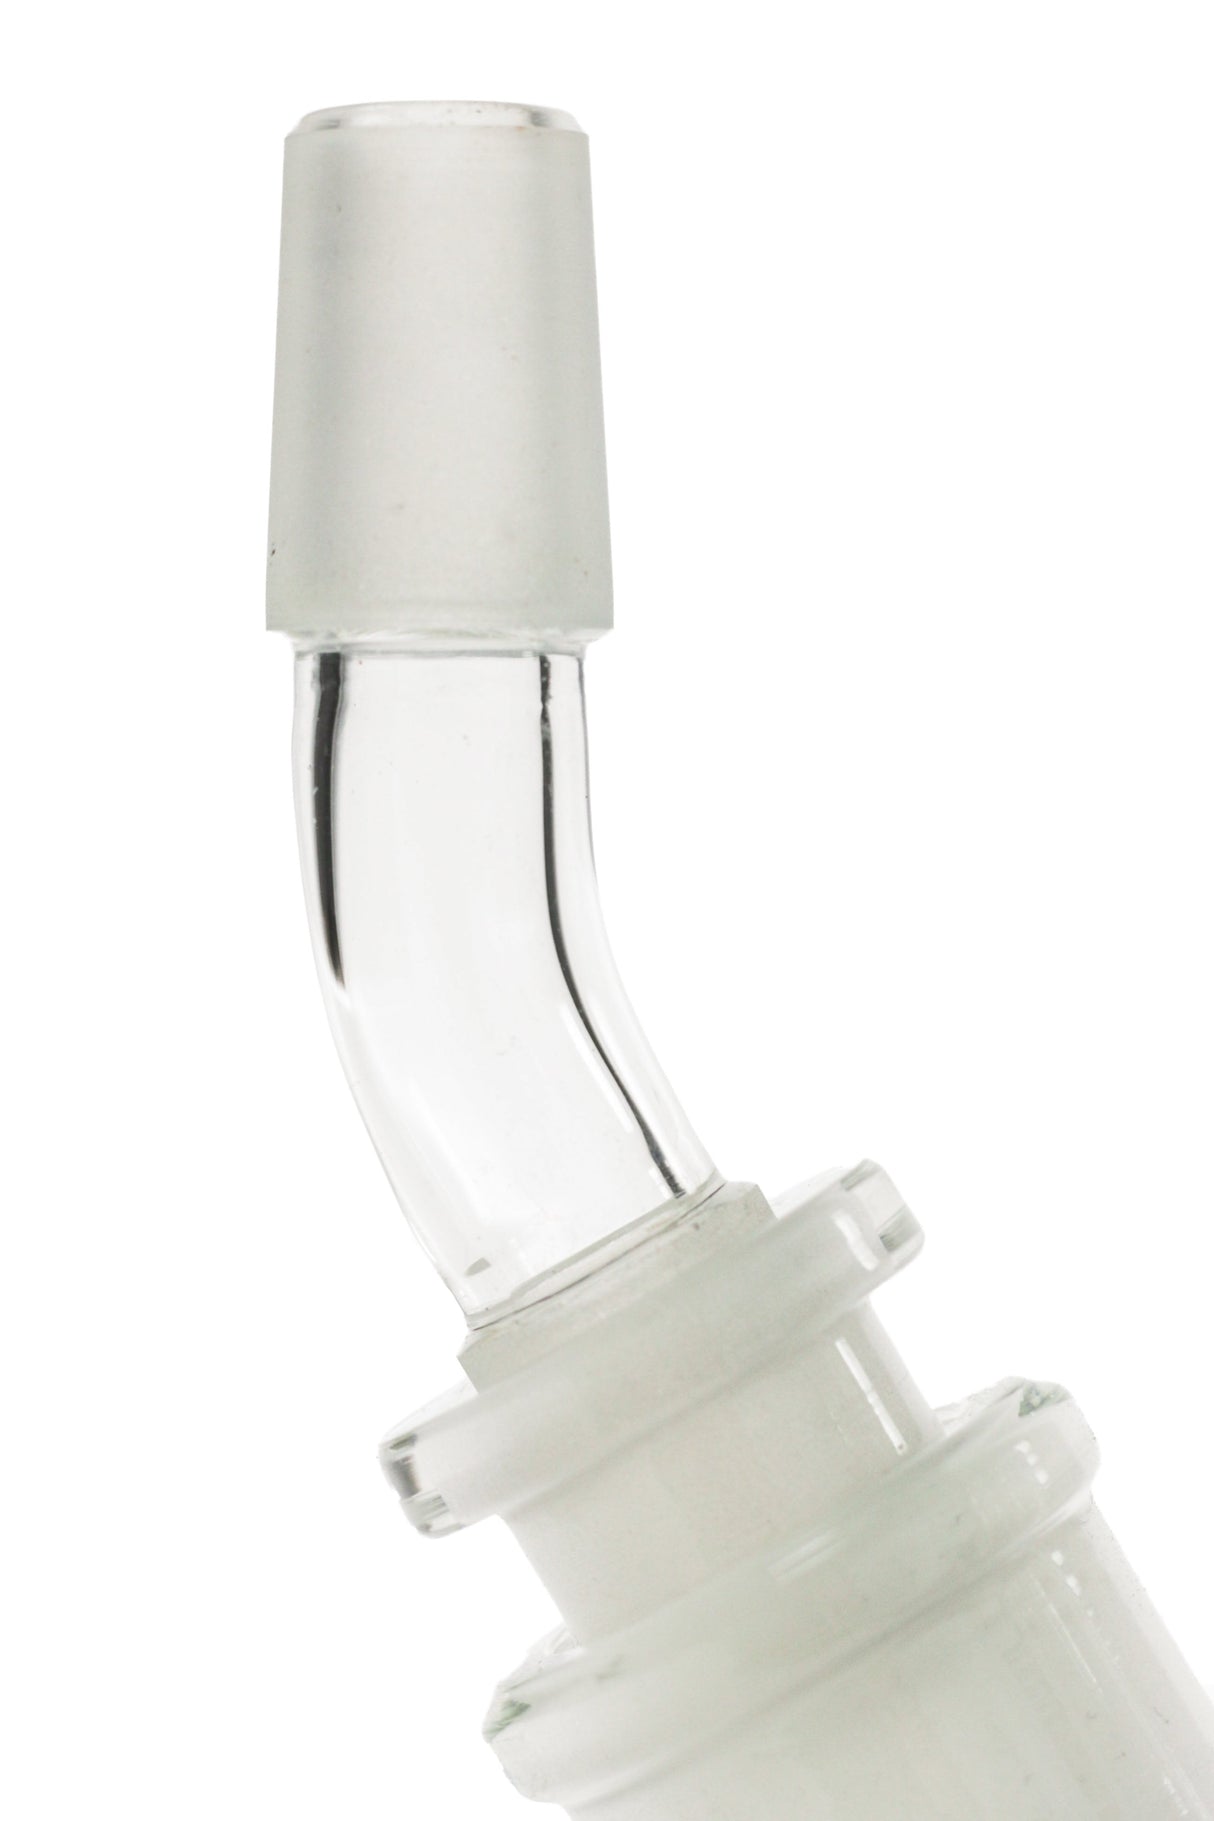 TAG - Quartz Angle Adapter for Bongs - Close-Up Side View on White Background